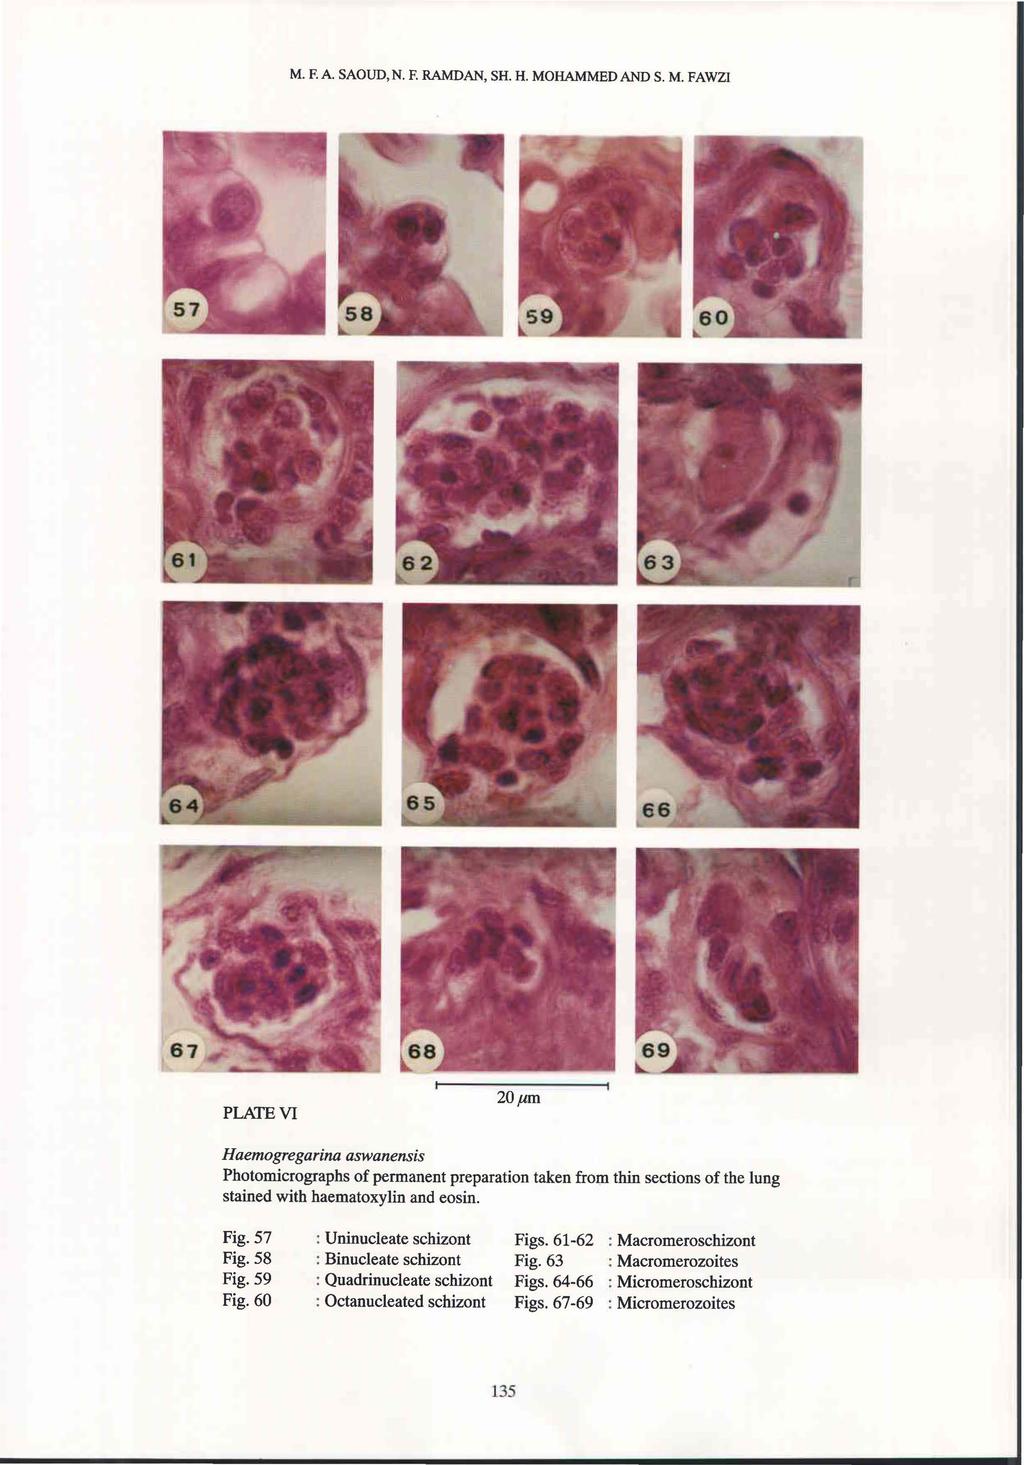 M.F.A. SAOUD, N. F. RAMDAN, SH. H. MOHAMMED AND S. M. FAWZl PLATE VI 20pm Haemogregarina aswanensis Photomicrographs of permanent preparation taken from thin sections of the lung stained with haematoxylin and eosin.